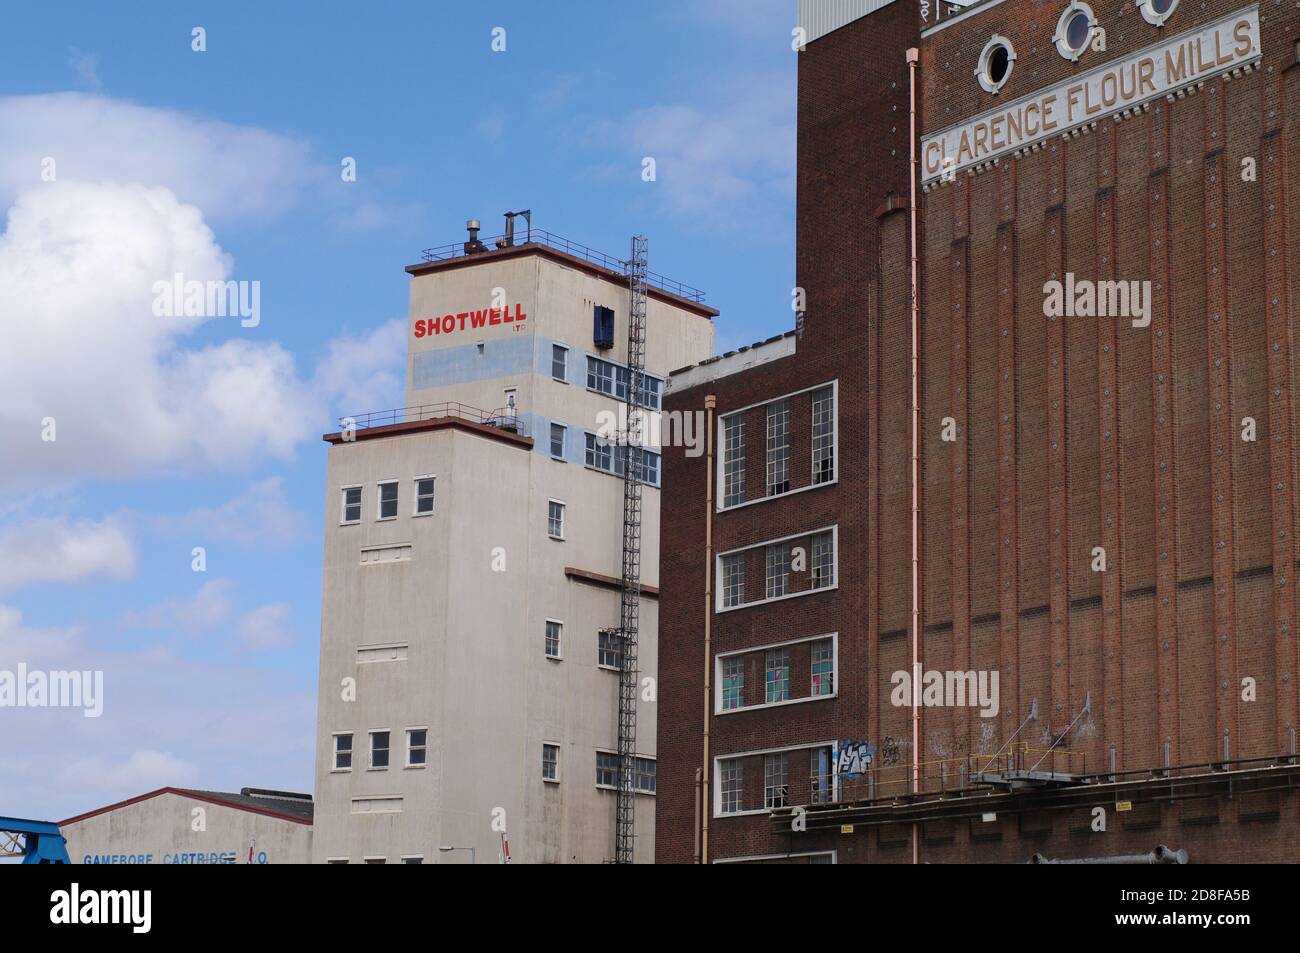 Clarence Flour Mills, Hull, Royaume-Uni Banque D'Images